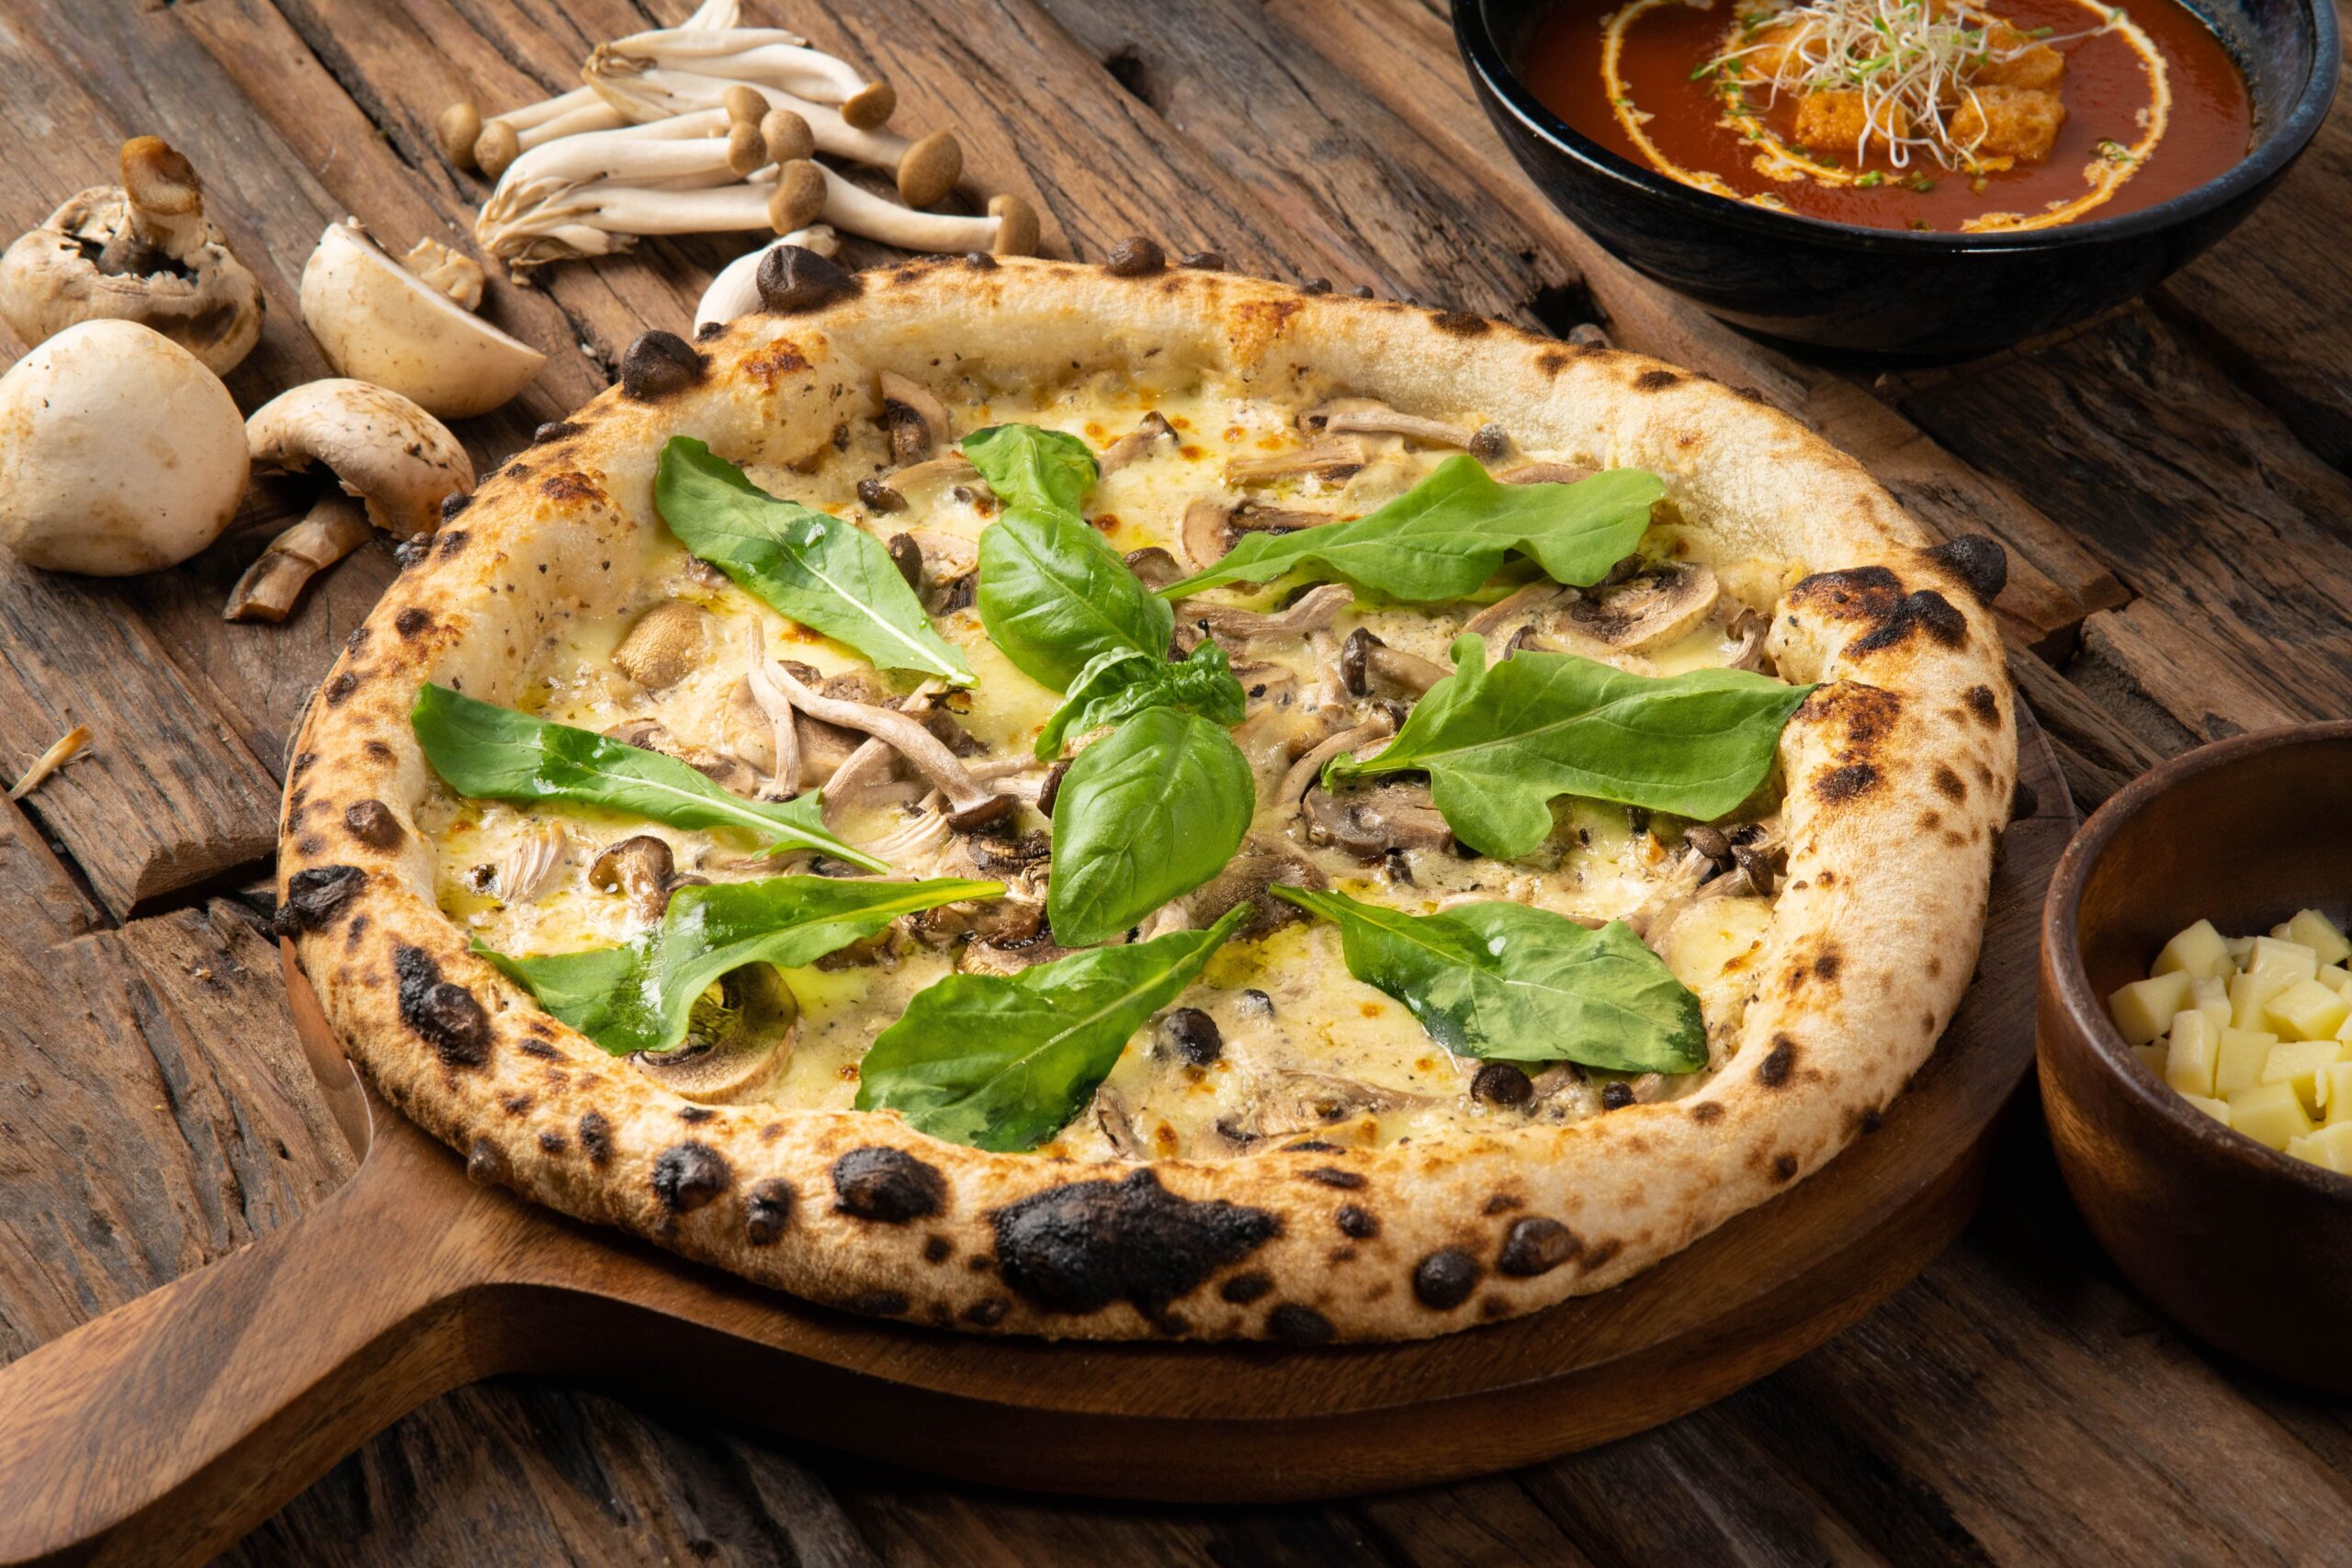 A wood-fired pizza with truffle mushroom cream & oil, mushrooms and imported cheeses